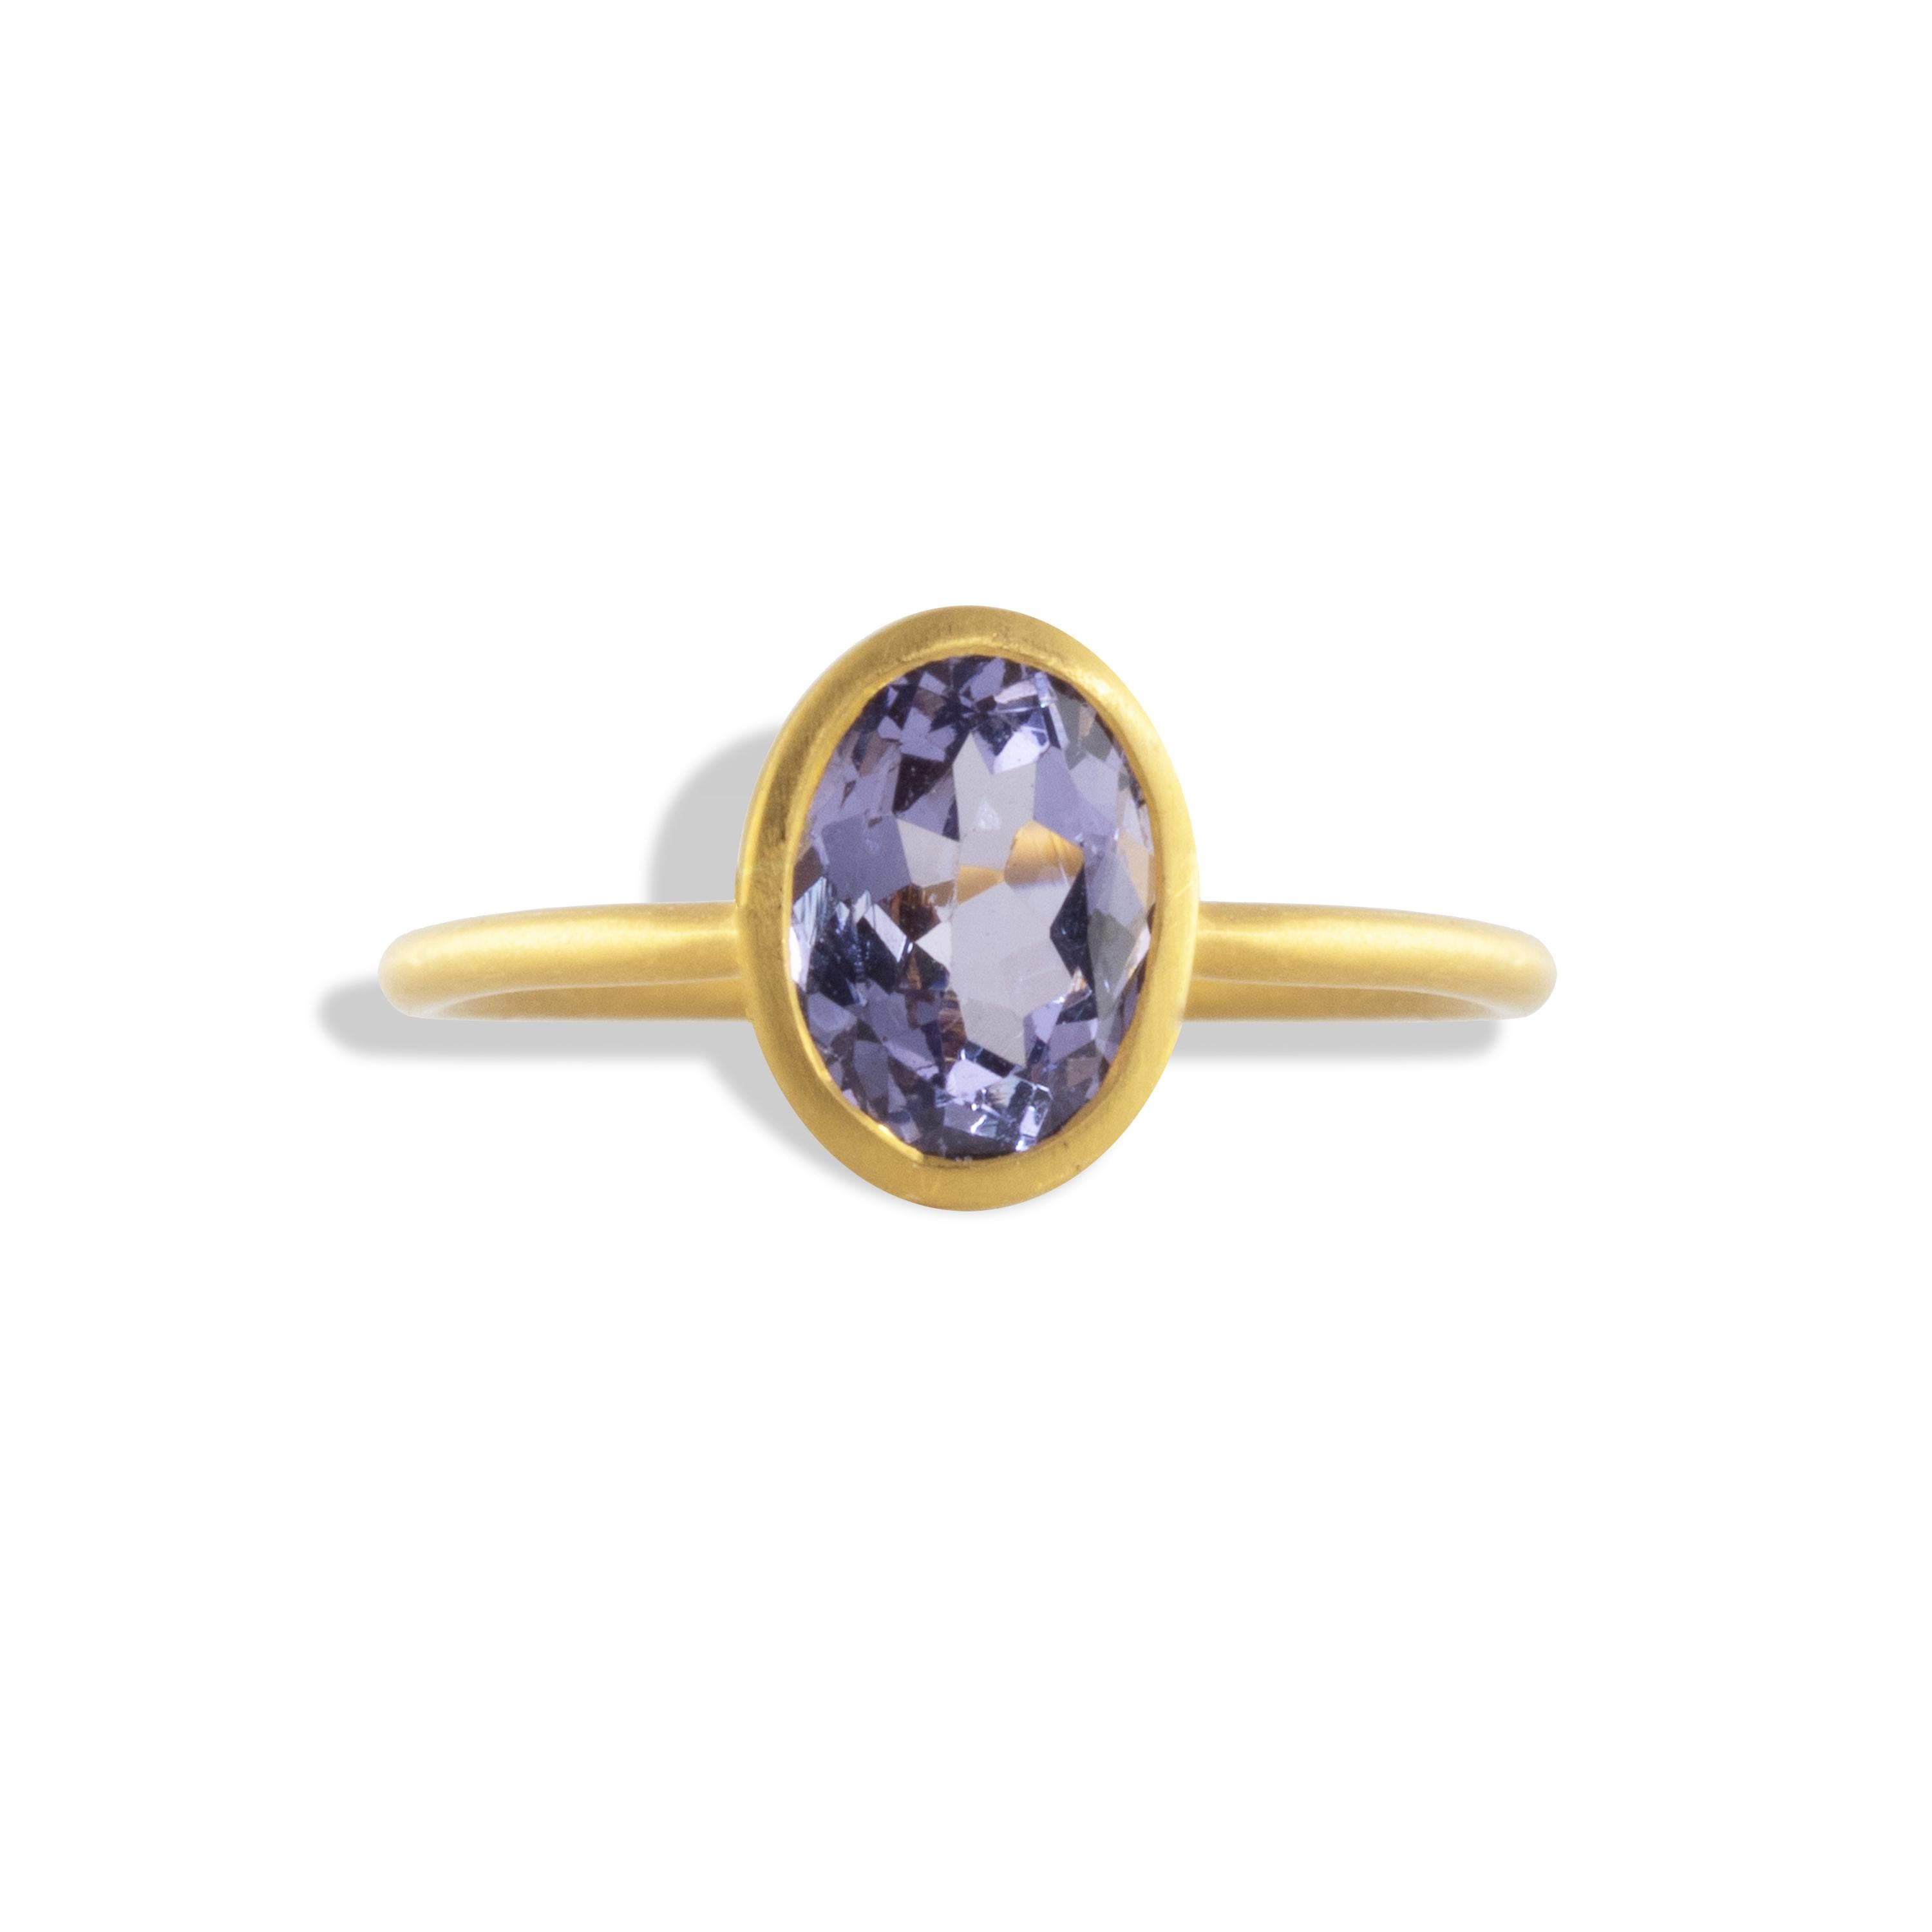 Beautiful blue-violet Spinel stacking ring in 22k matte yellow gold.  1.34 carats of this unique color of Spinel looks great alone of stacked with other rings.

Spinel is believed to encourage great passion, devotion and longevity.  Spinel is a